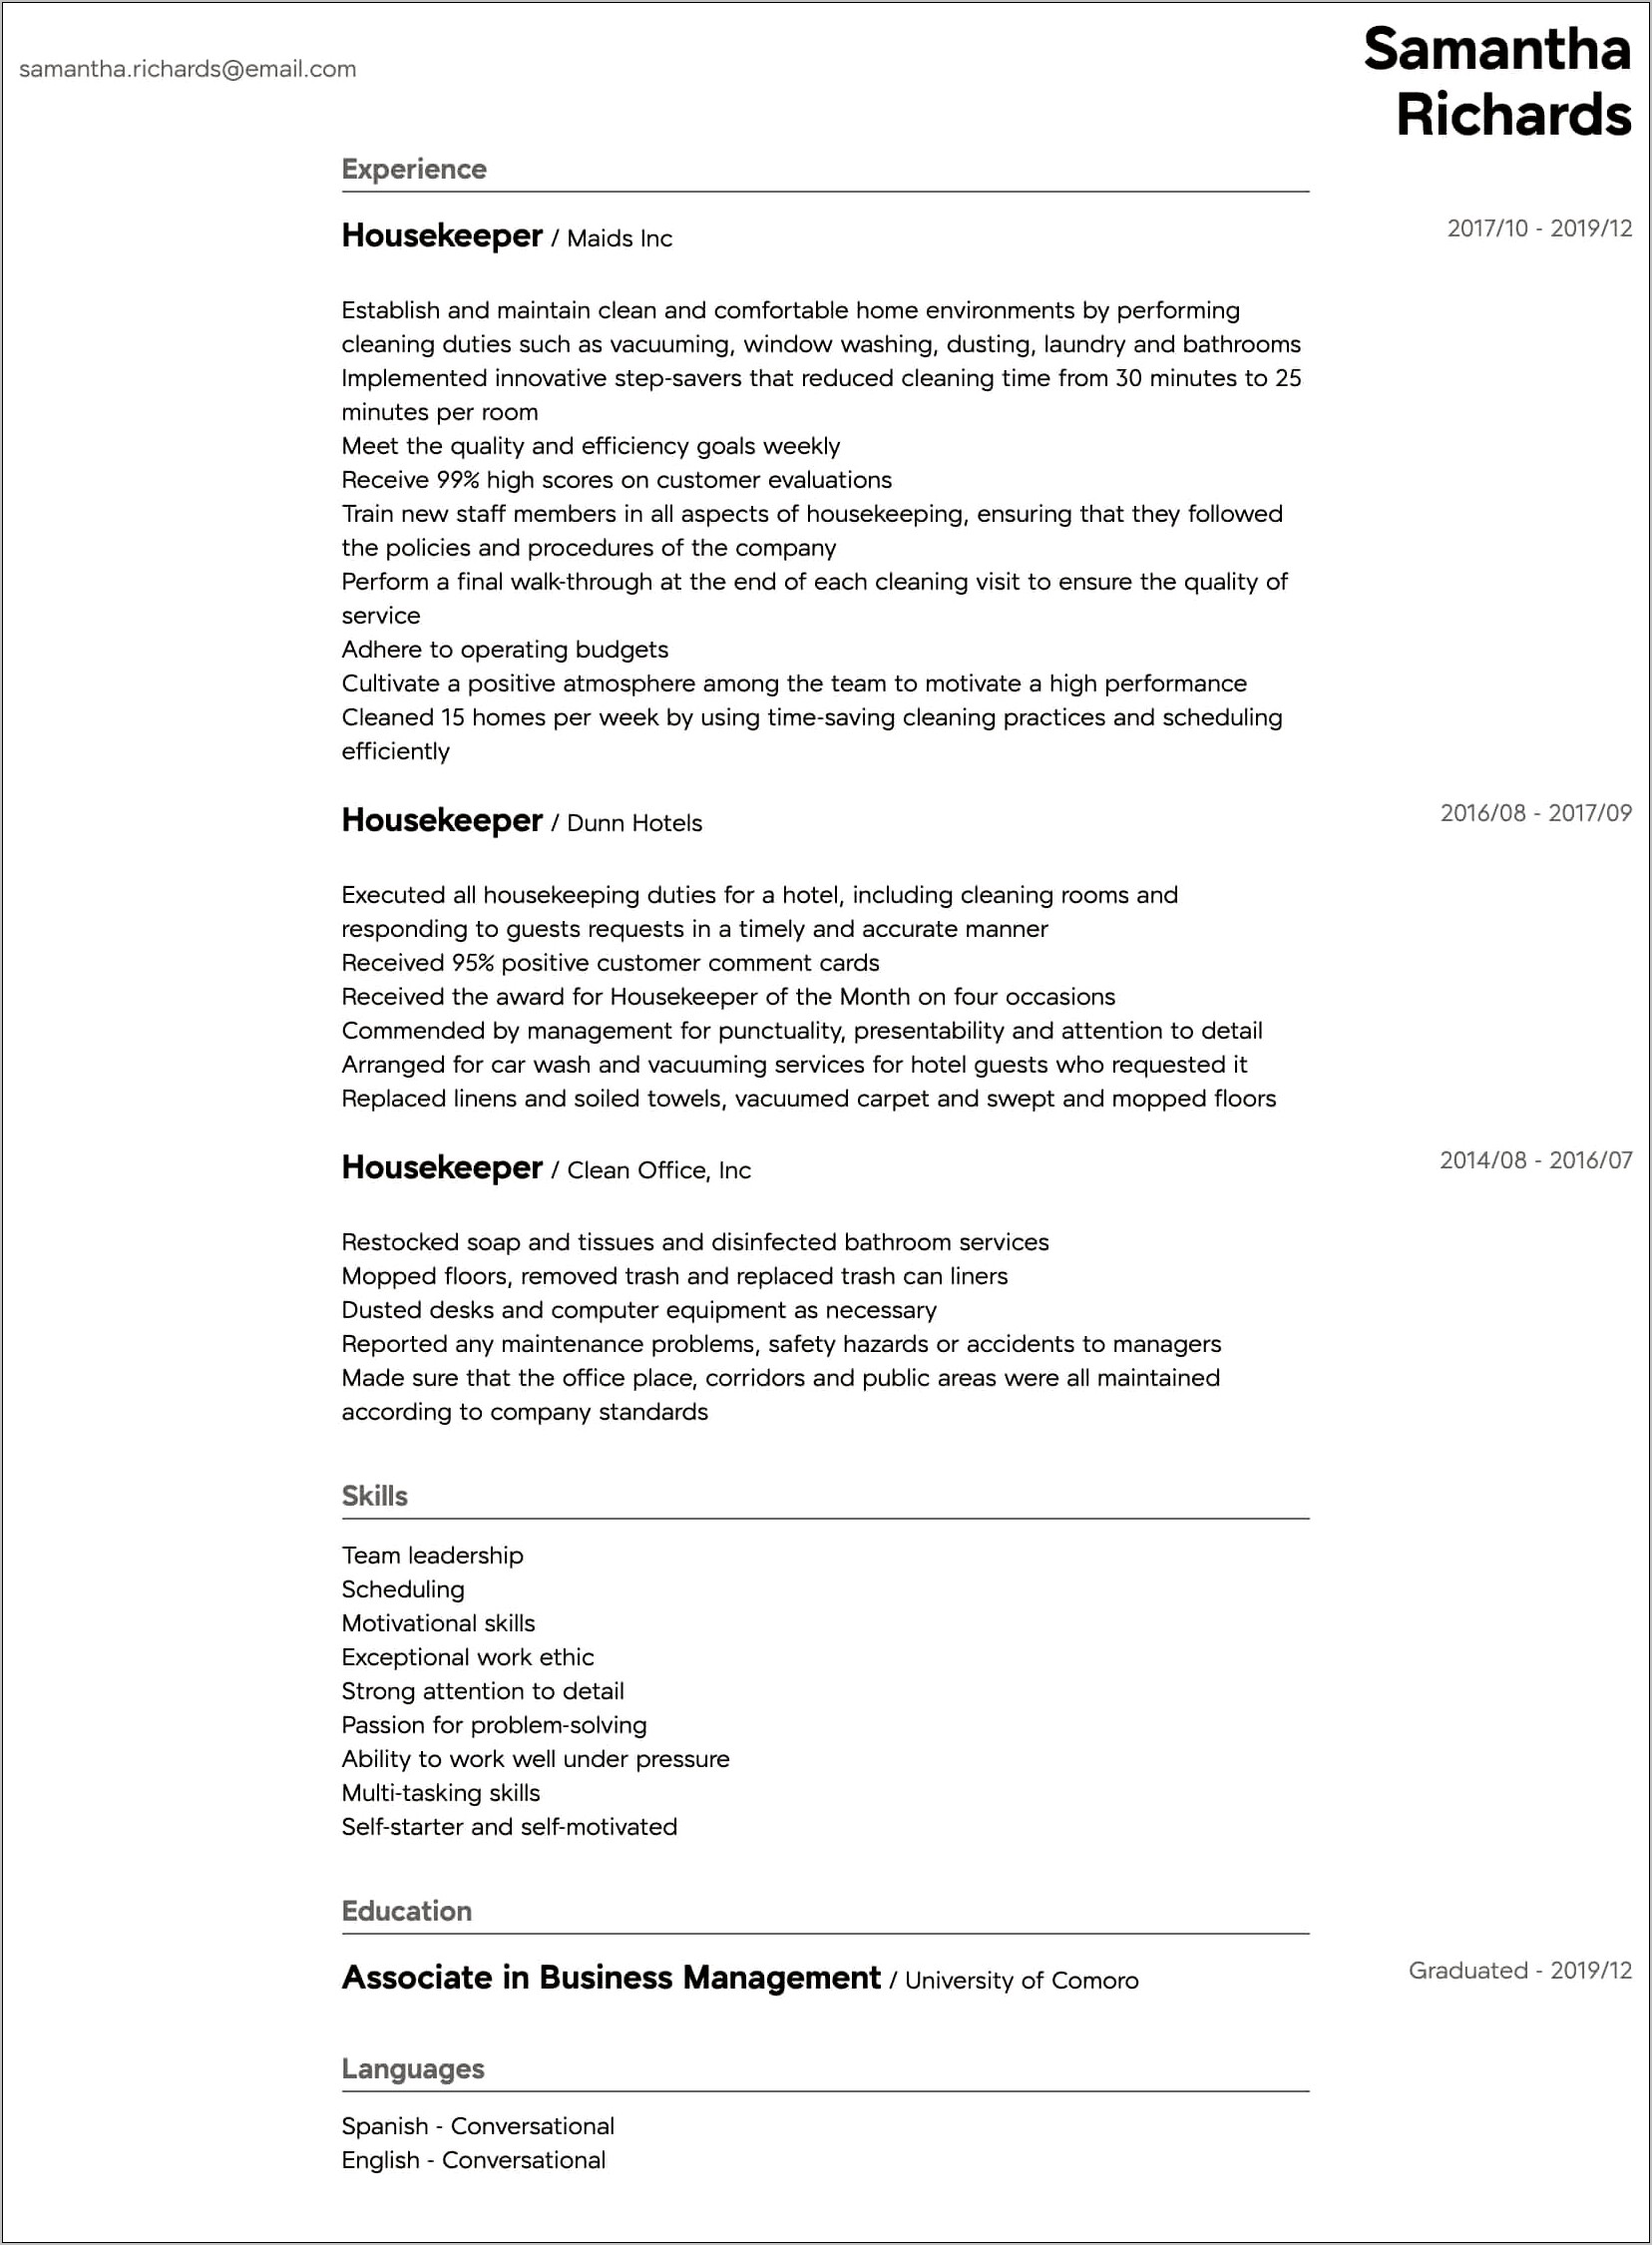 Basic Resume Examples Laudnry Attendant At Hotel